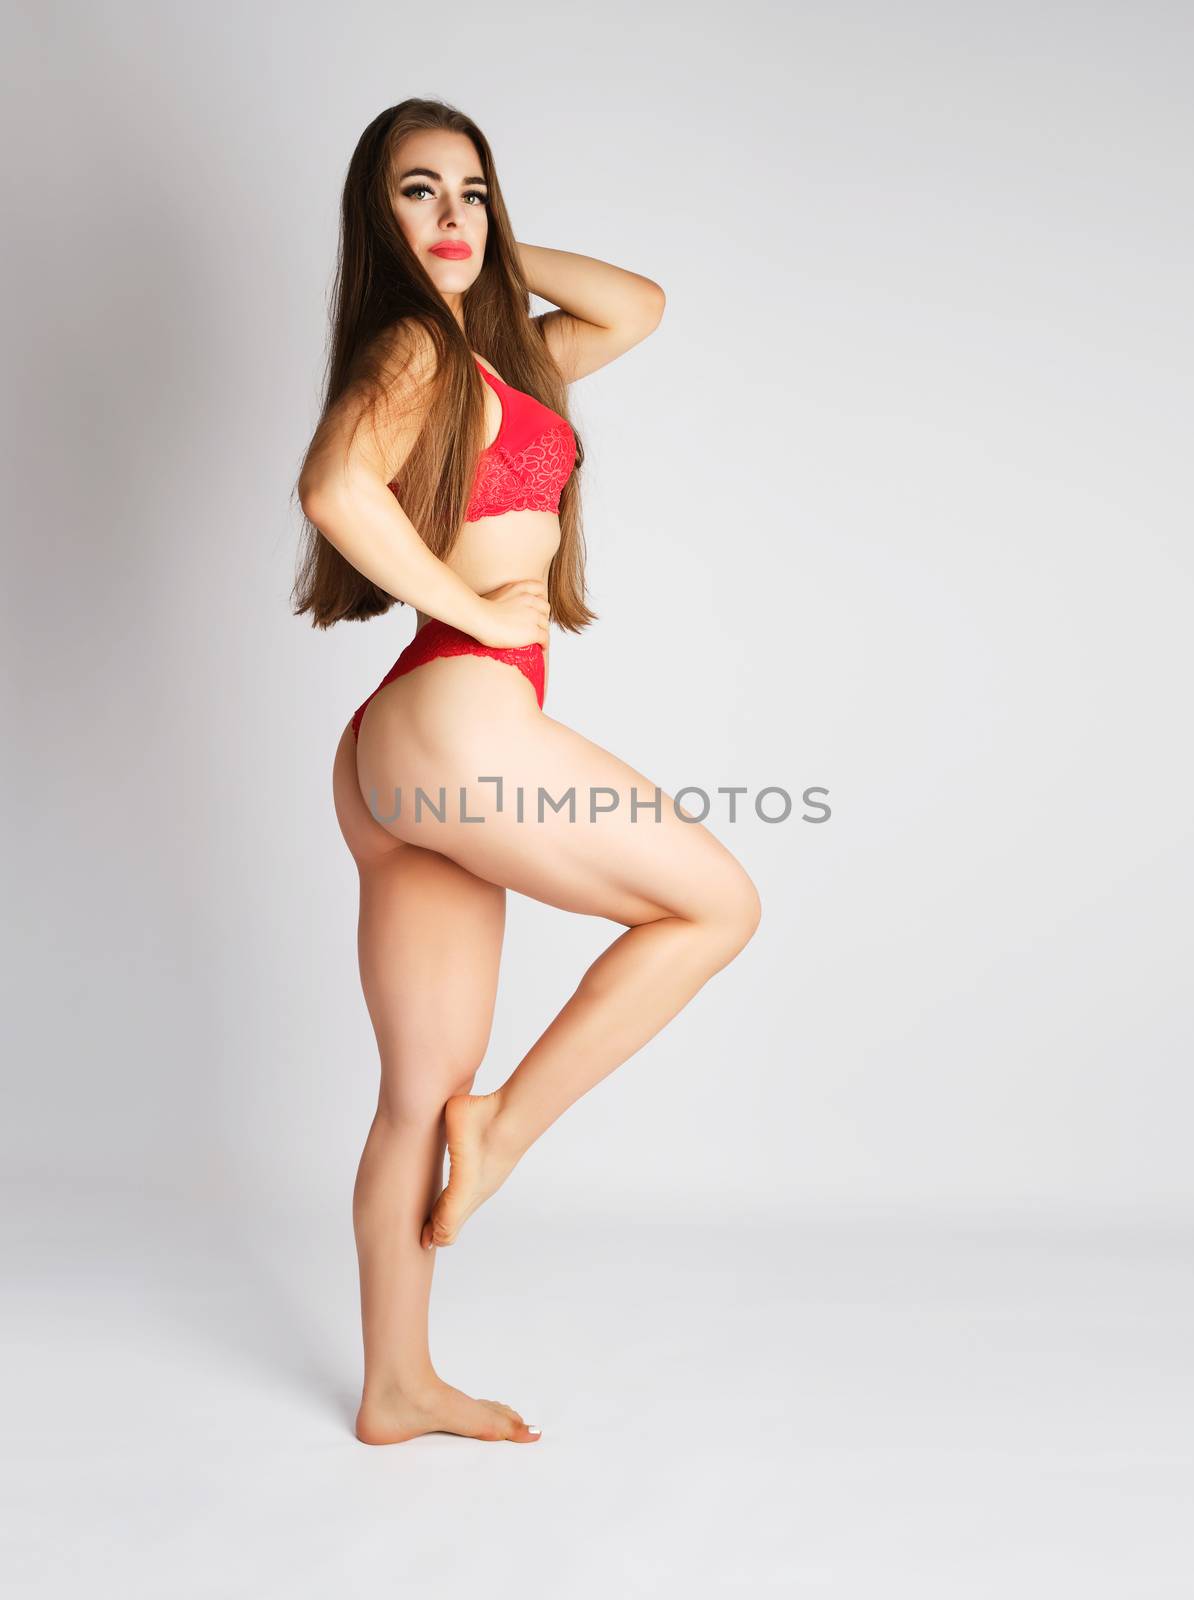 beautiful girl with a slim figure dressed with red lace lingerie by ndanko